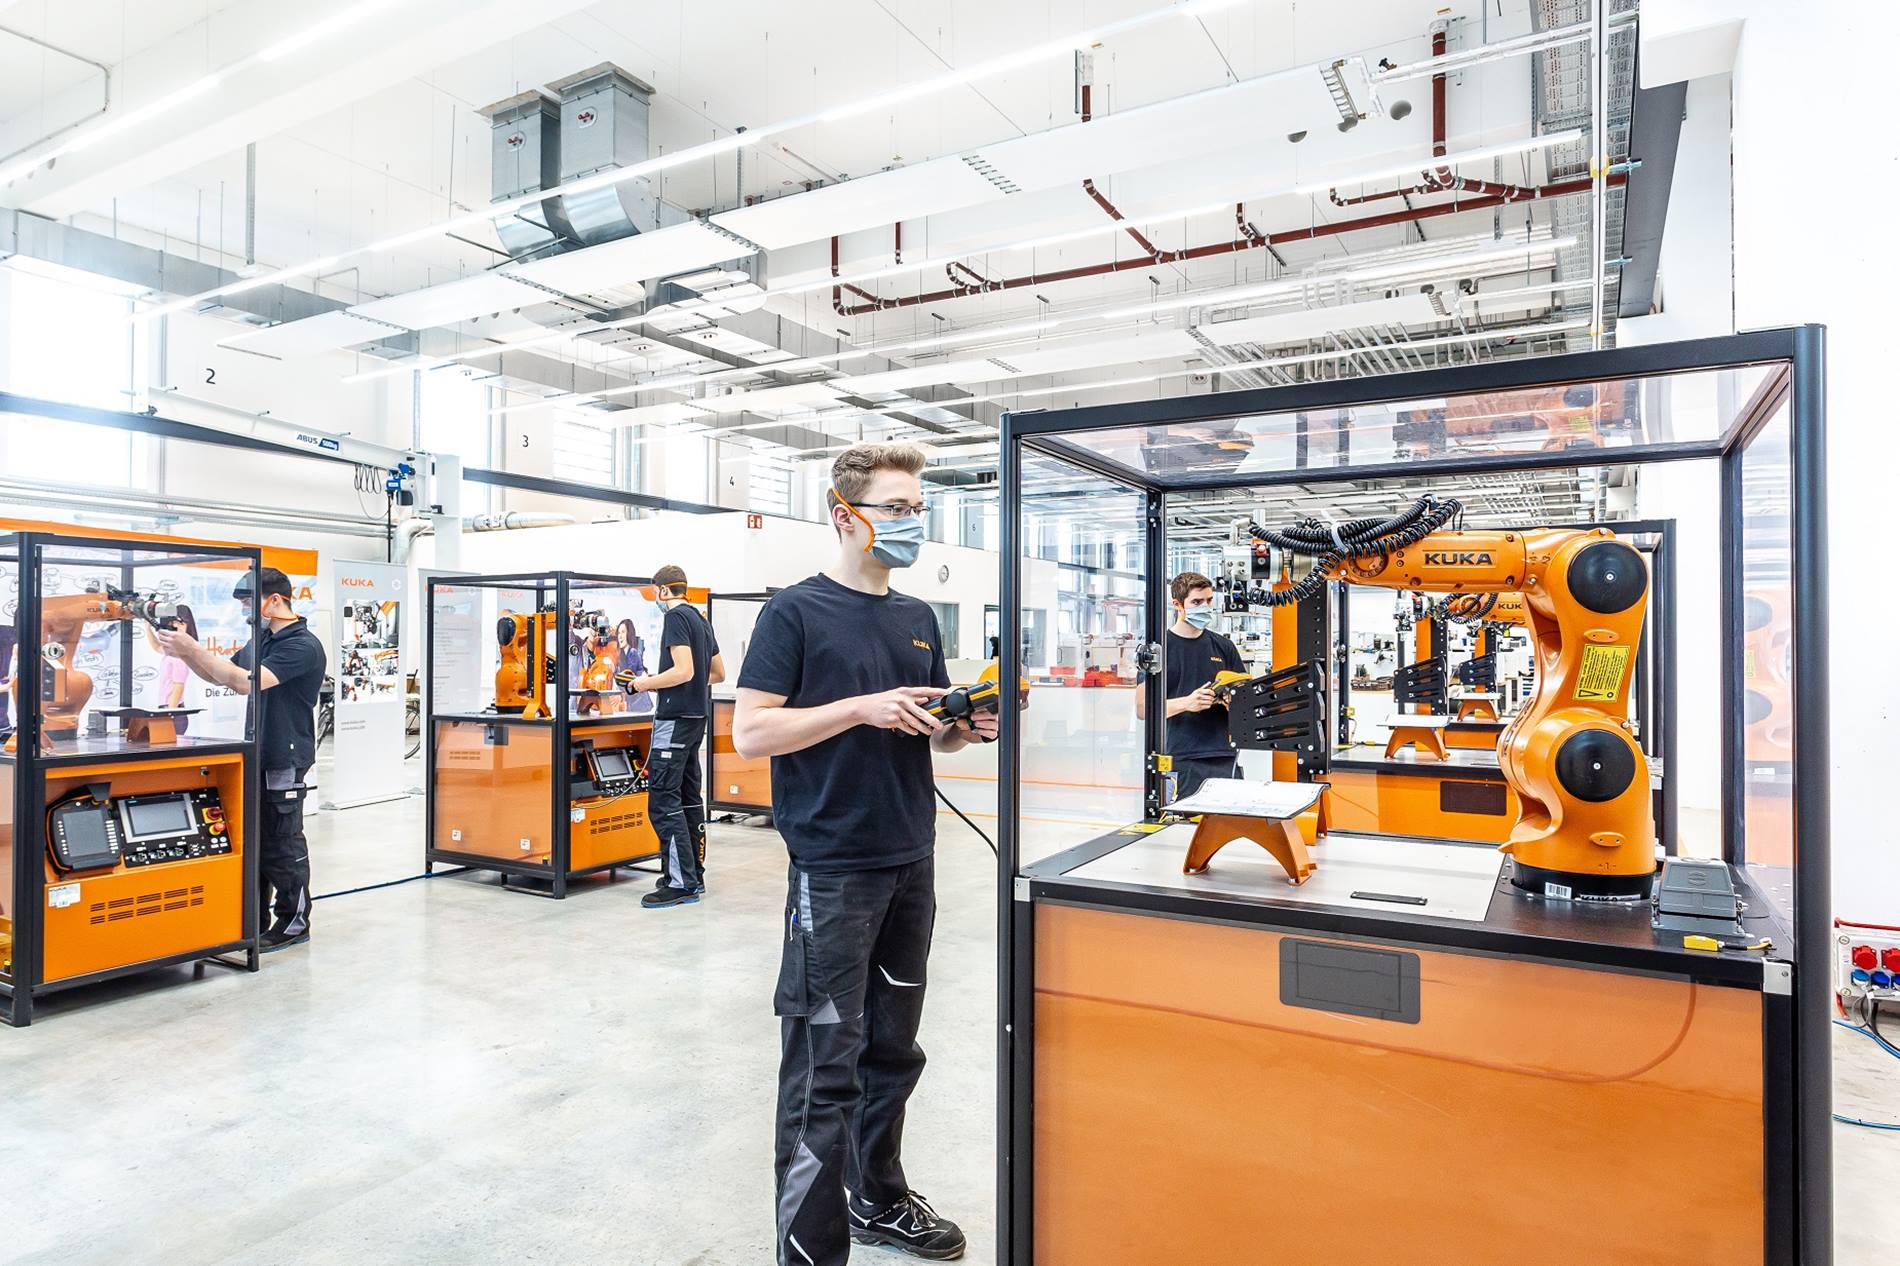 Trainees at the KUKA Training Center in Augsburg program robot cells.